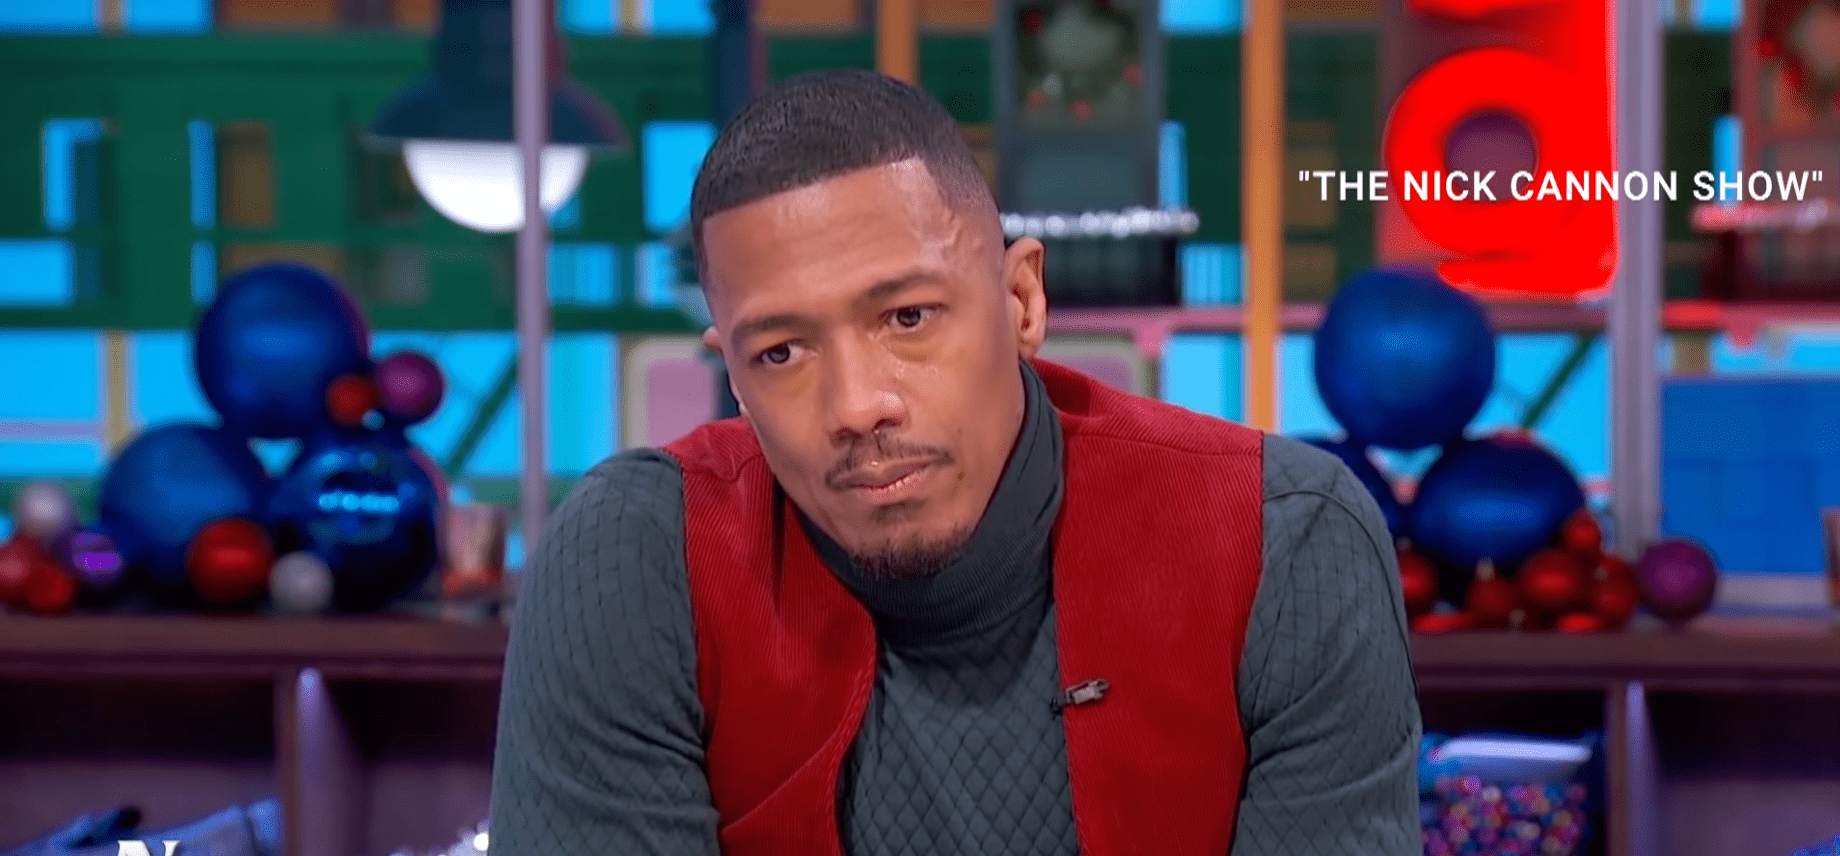 Nick Cannon talks about the death of his son, Zen, on his talk show "The Nick Cannon Show" | Source: YouTube.com/NBCNews